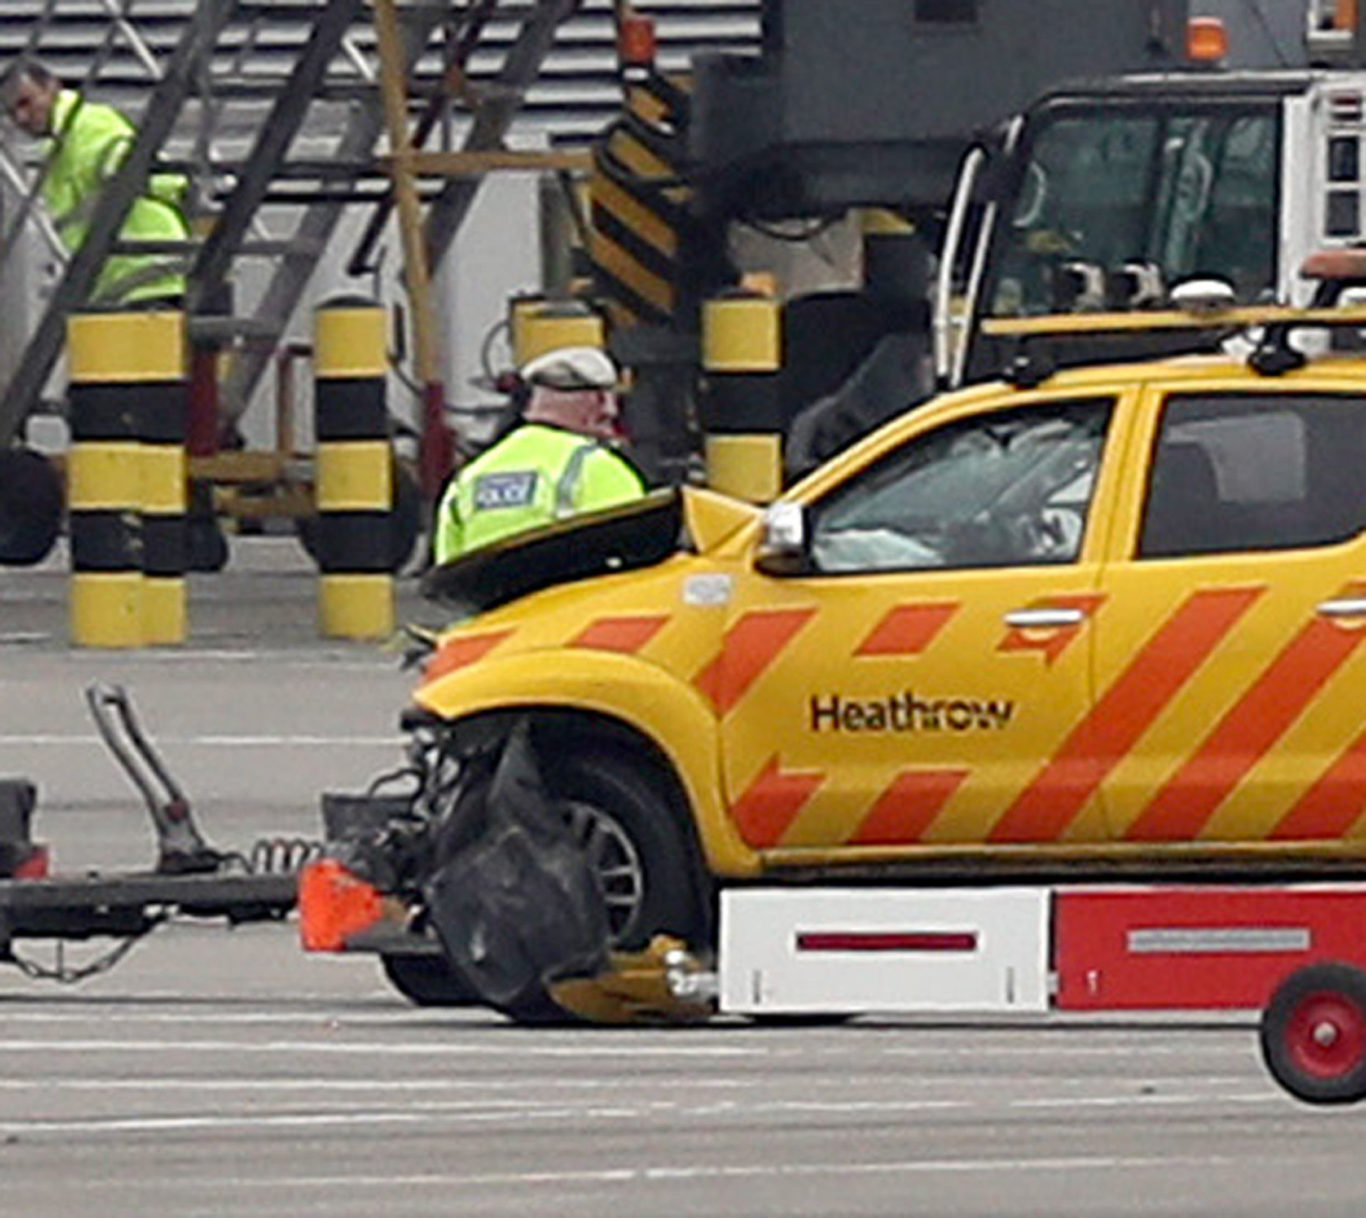 One of the vehicles involved in the crash at Heathrow Airport 